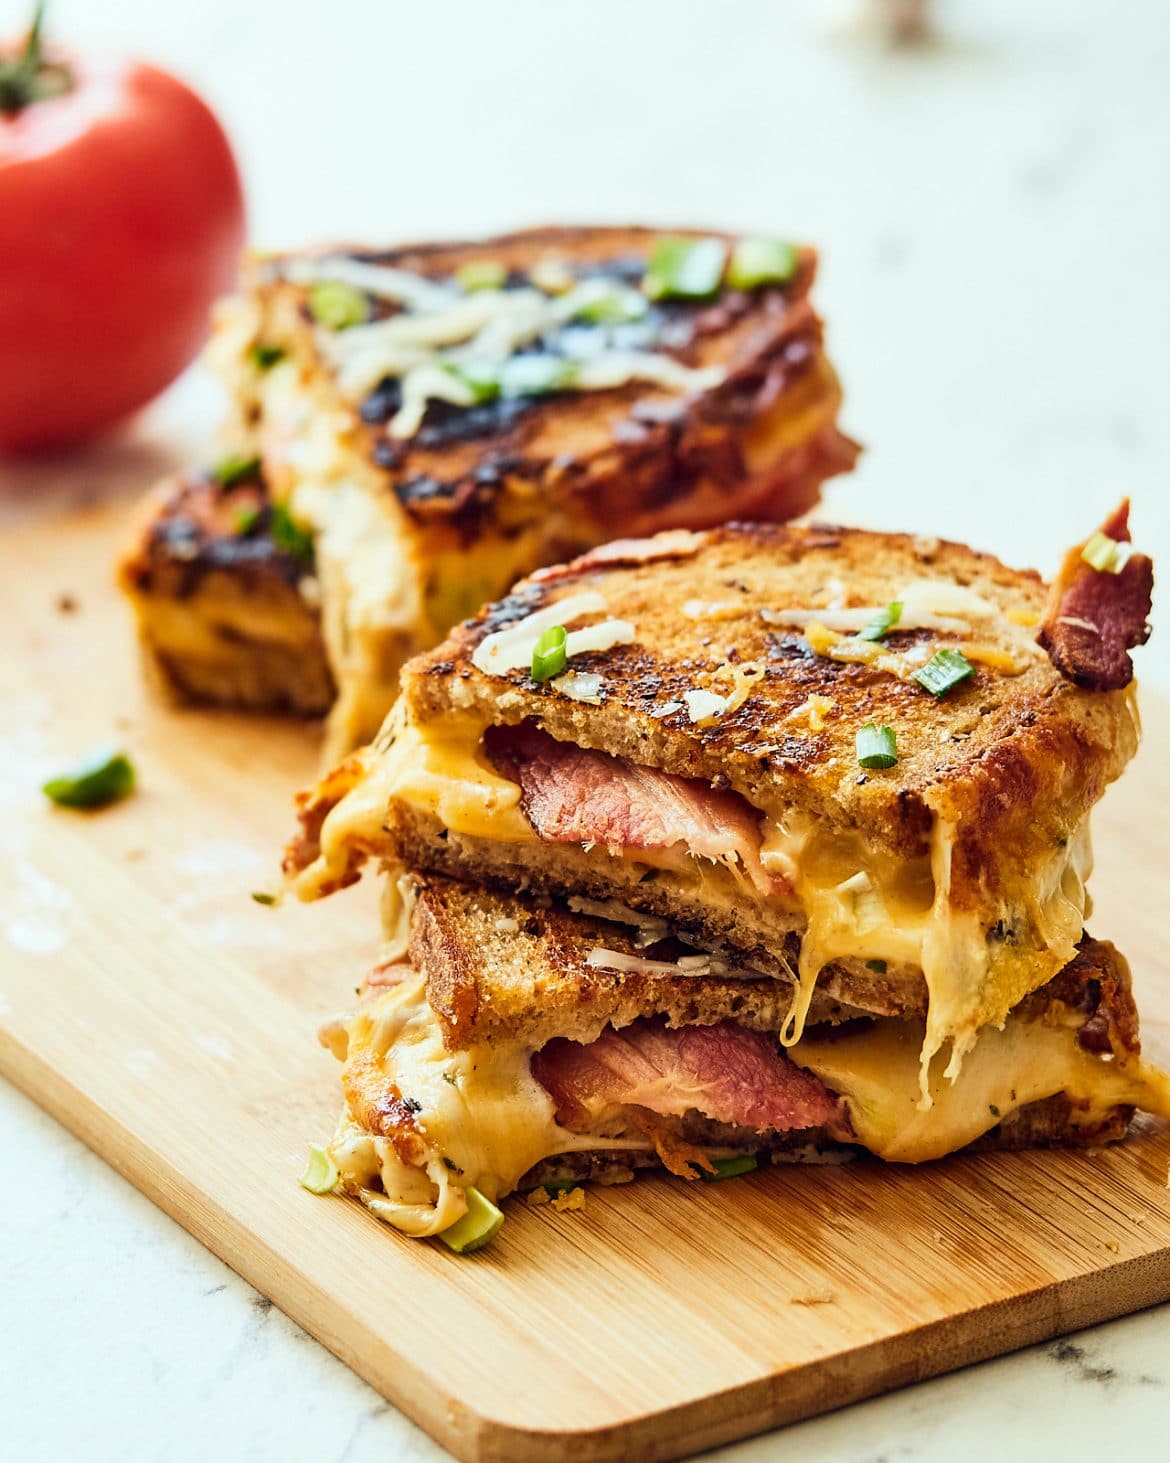 Bacon Sandwich with Cheddar and Tomatoes